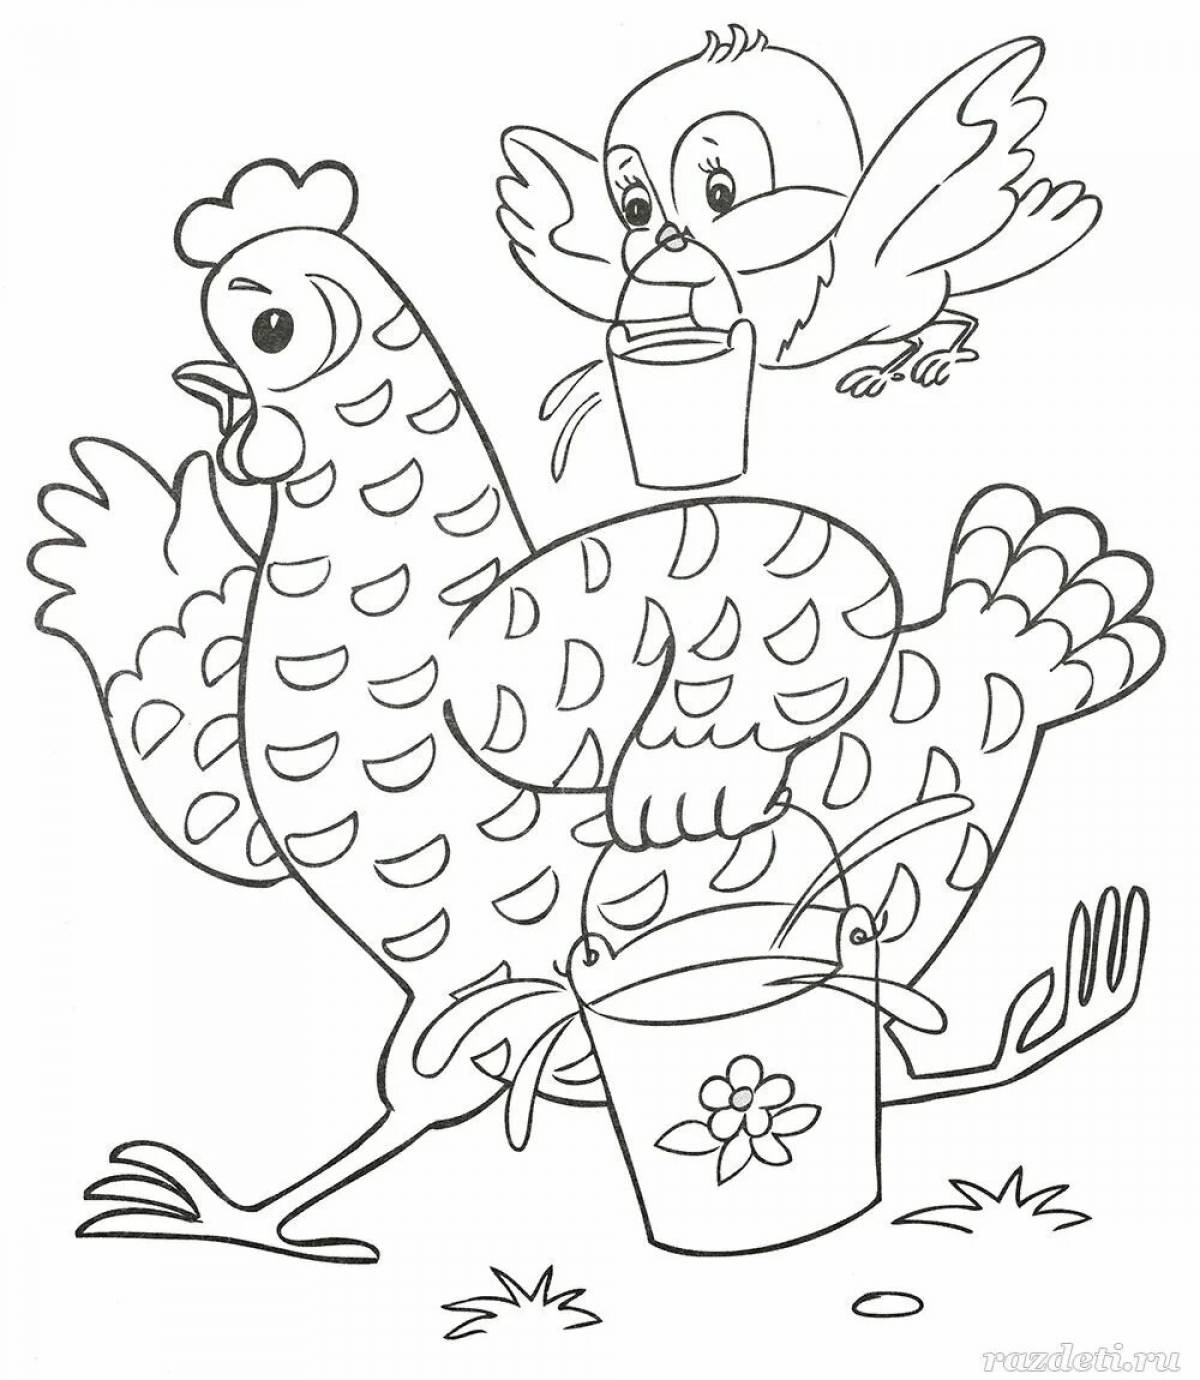 Attractive cat house coloring page for kids